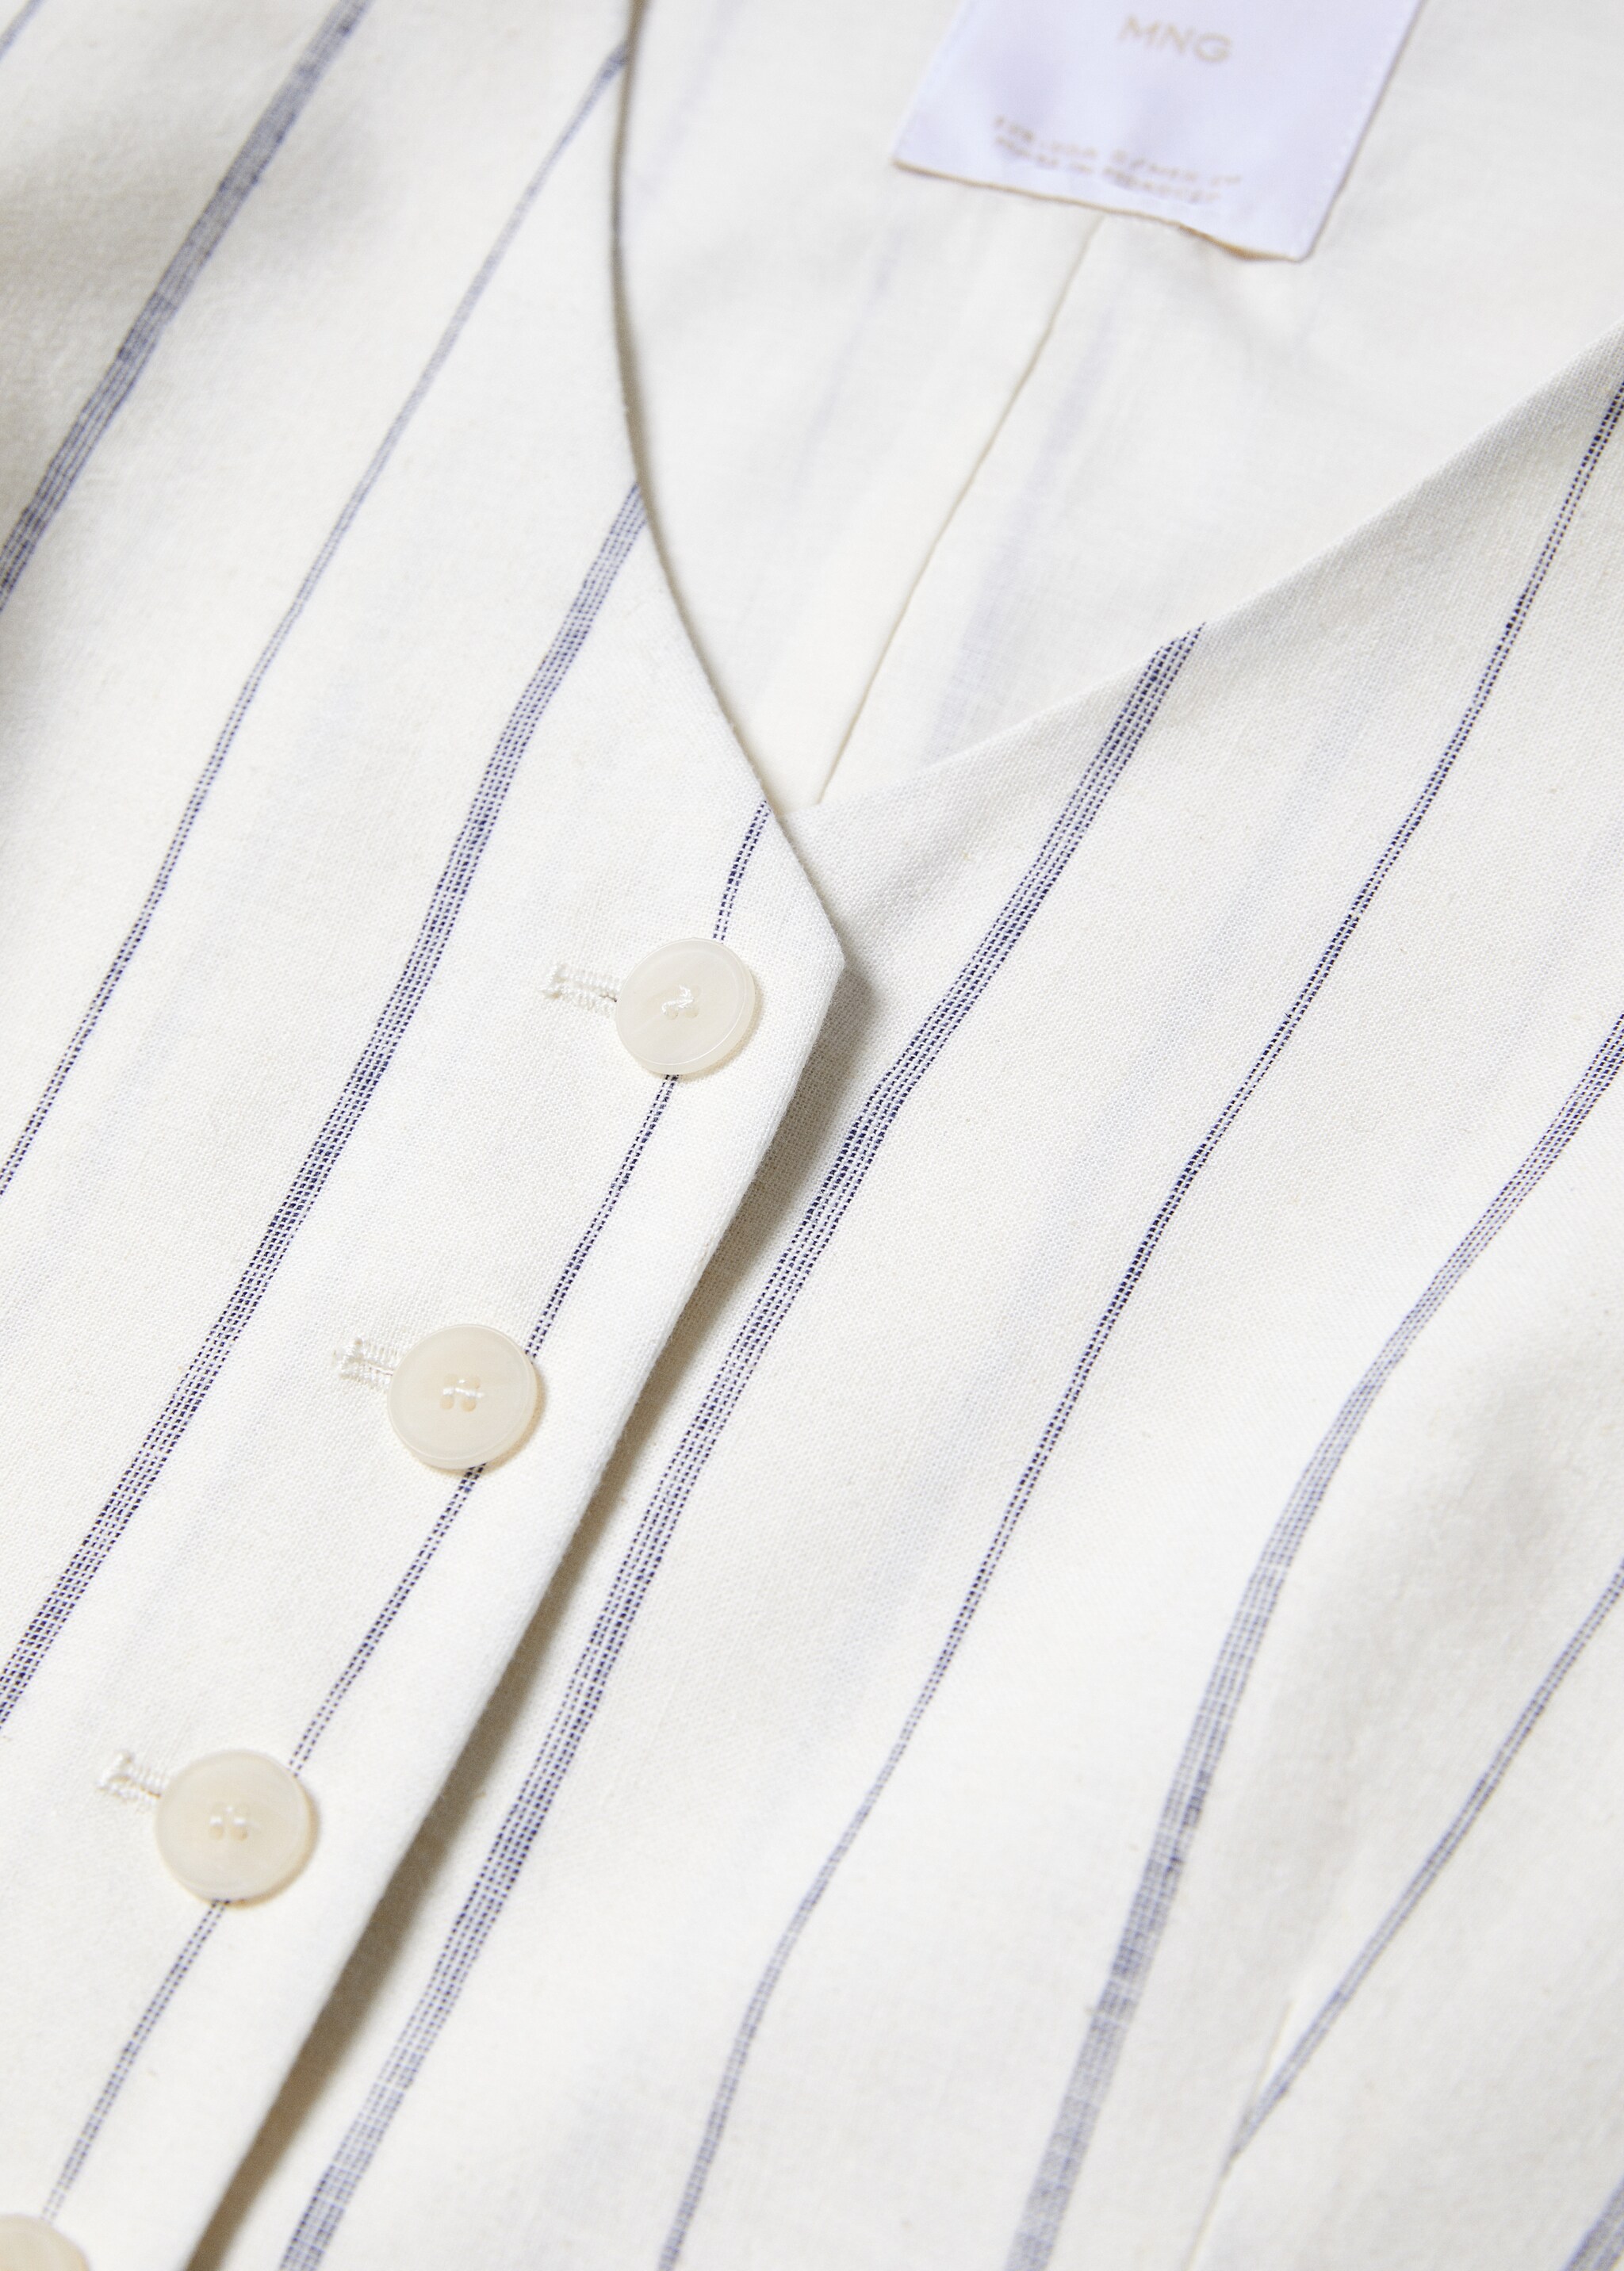 Striped suit waistcoat - Details of the article 8